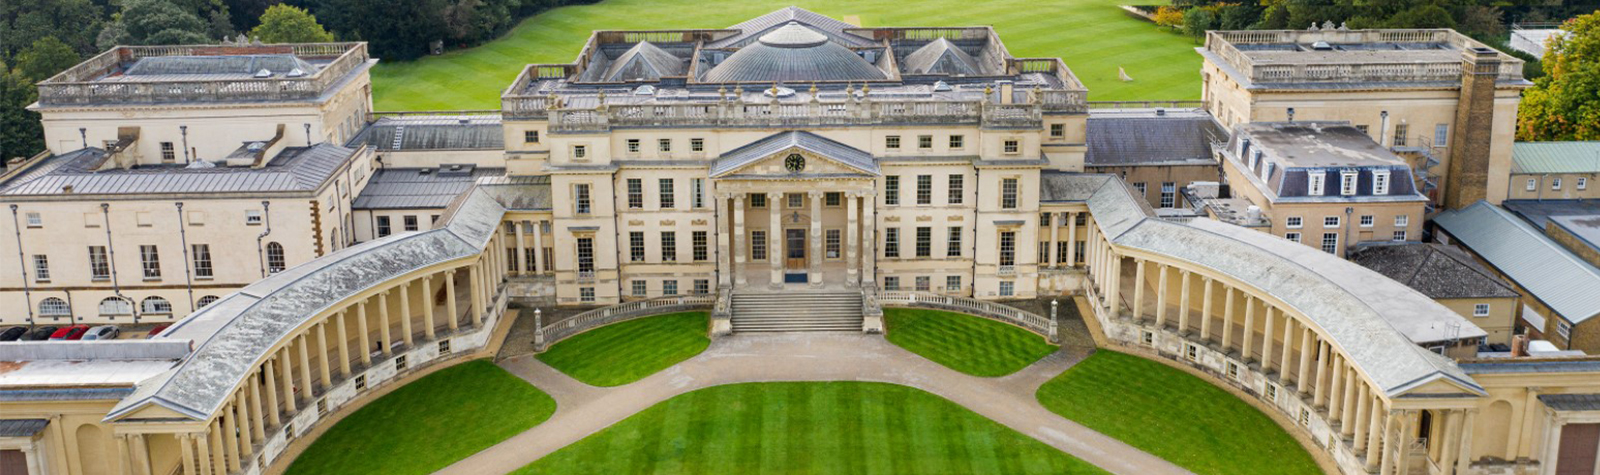 Women’s Trials To Take Place At Stowe School